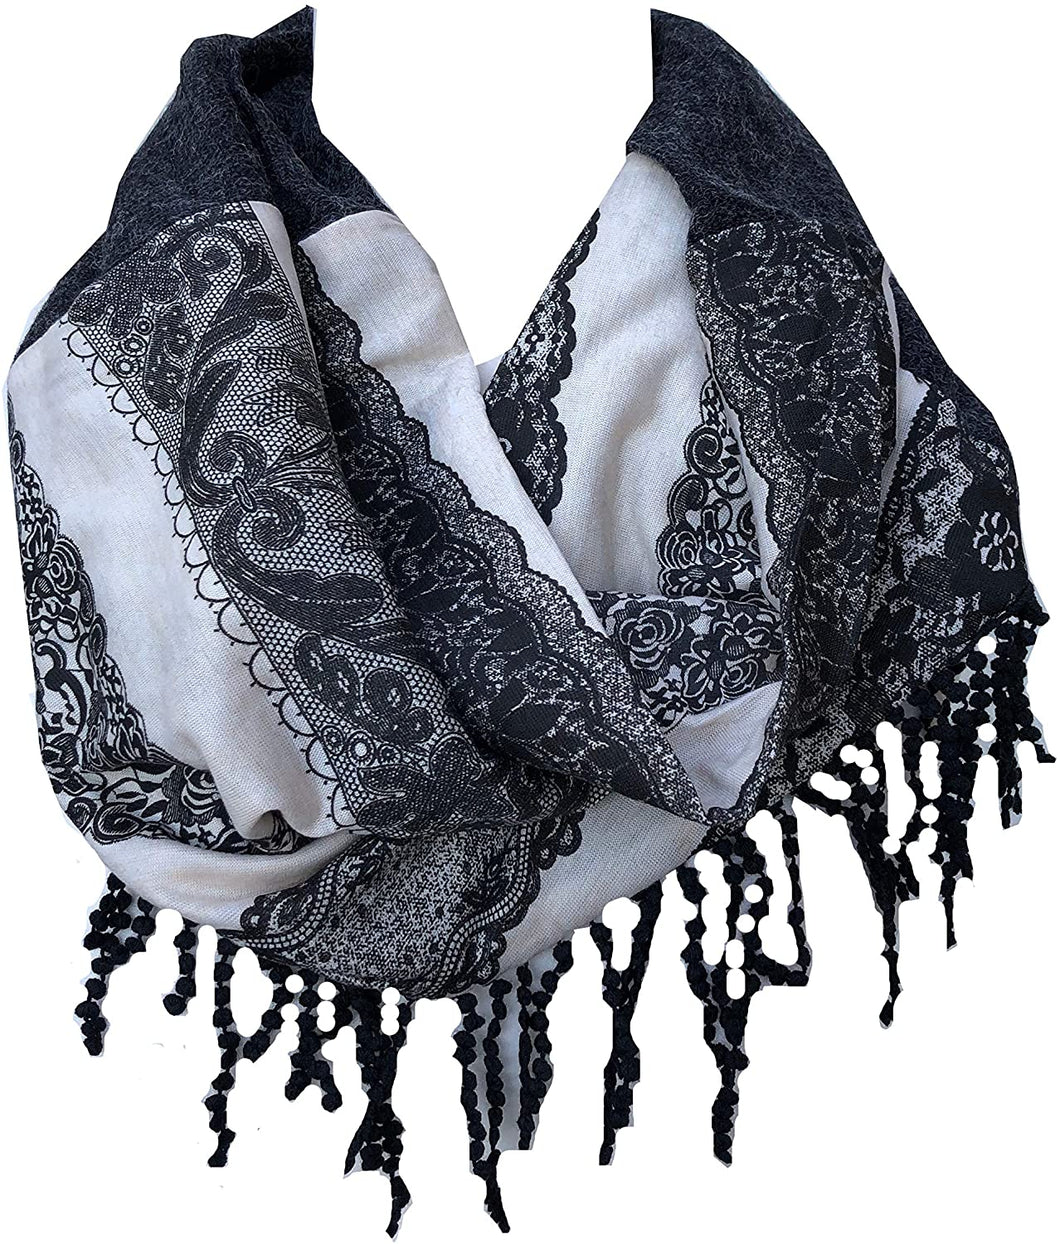 black funky snood with diamond design finish and small tassels